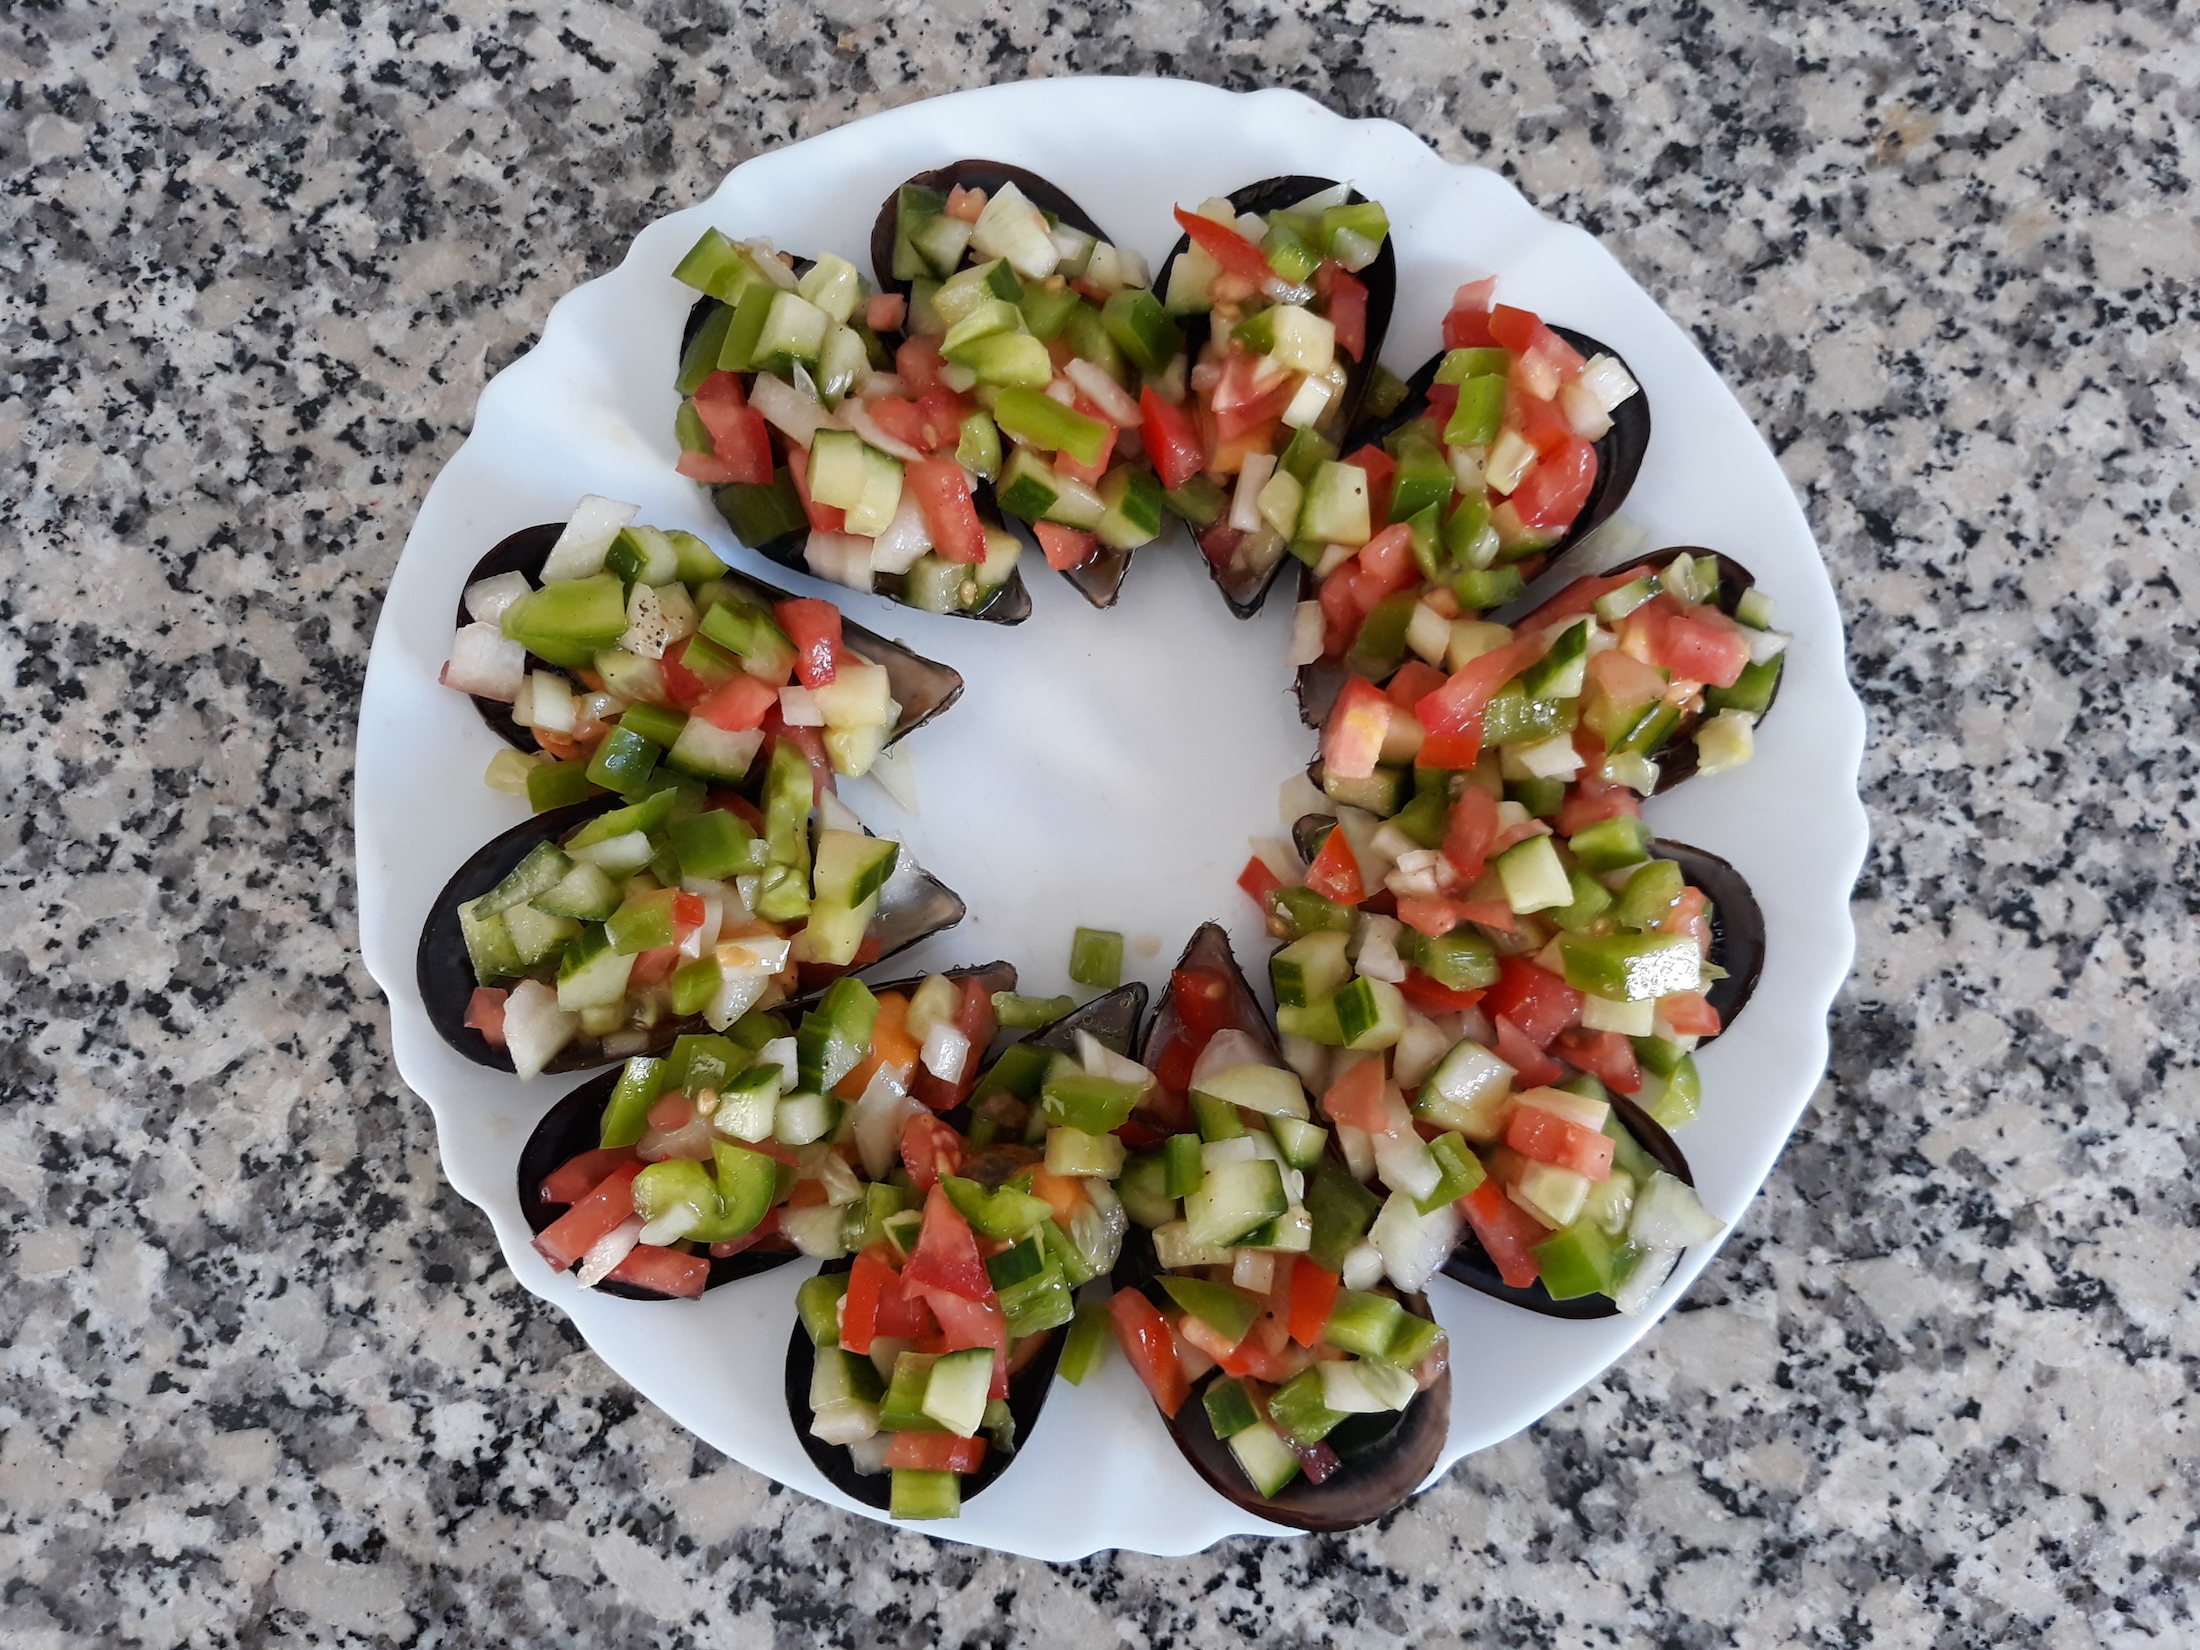 Mussels with Pipirrana Salad